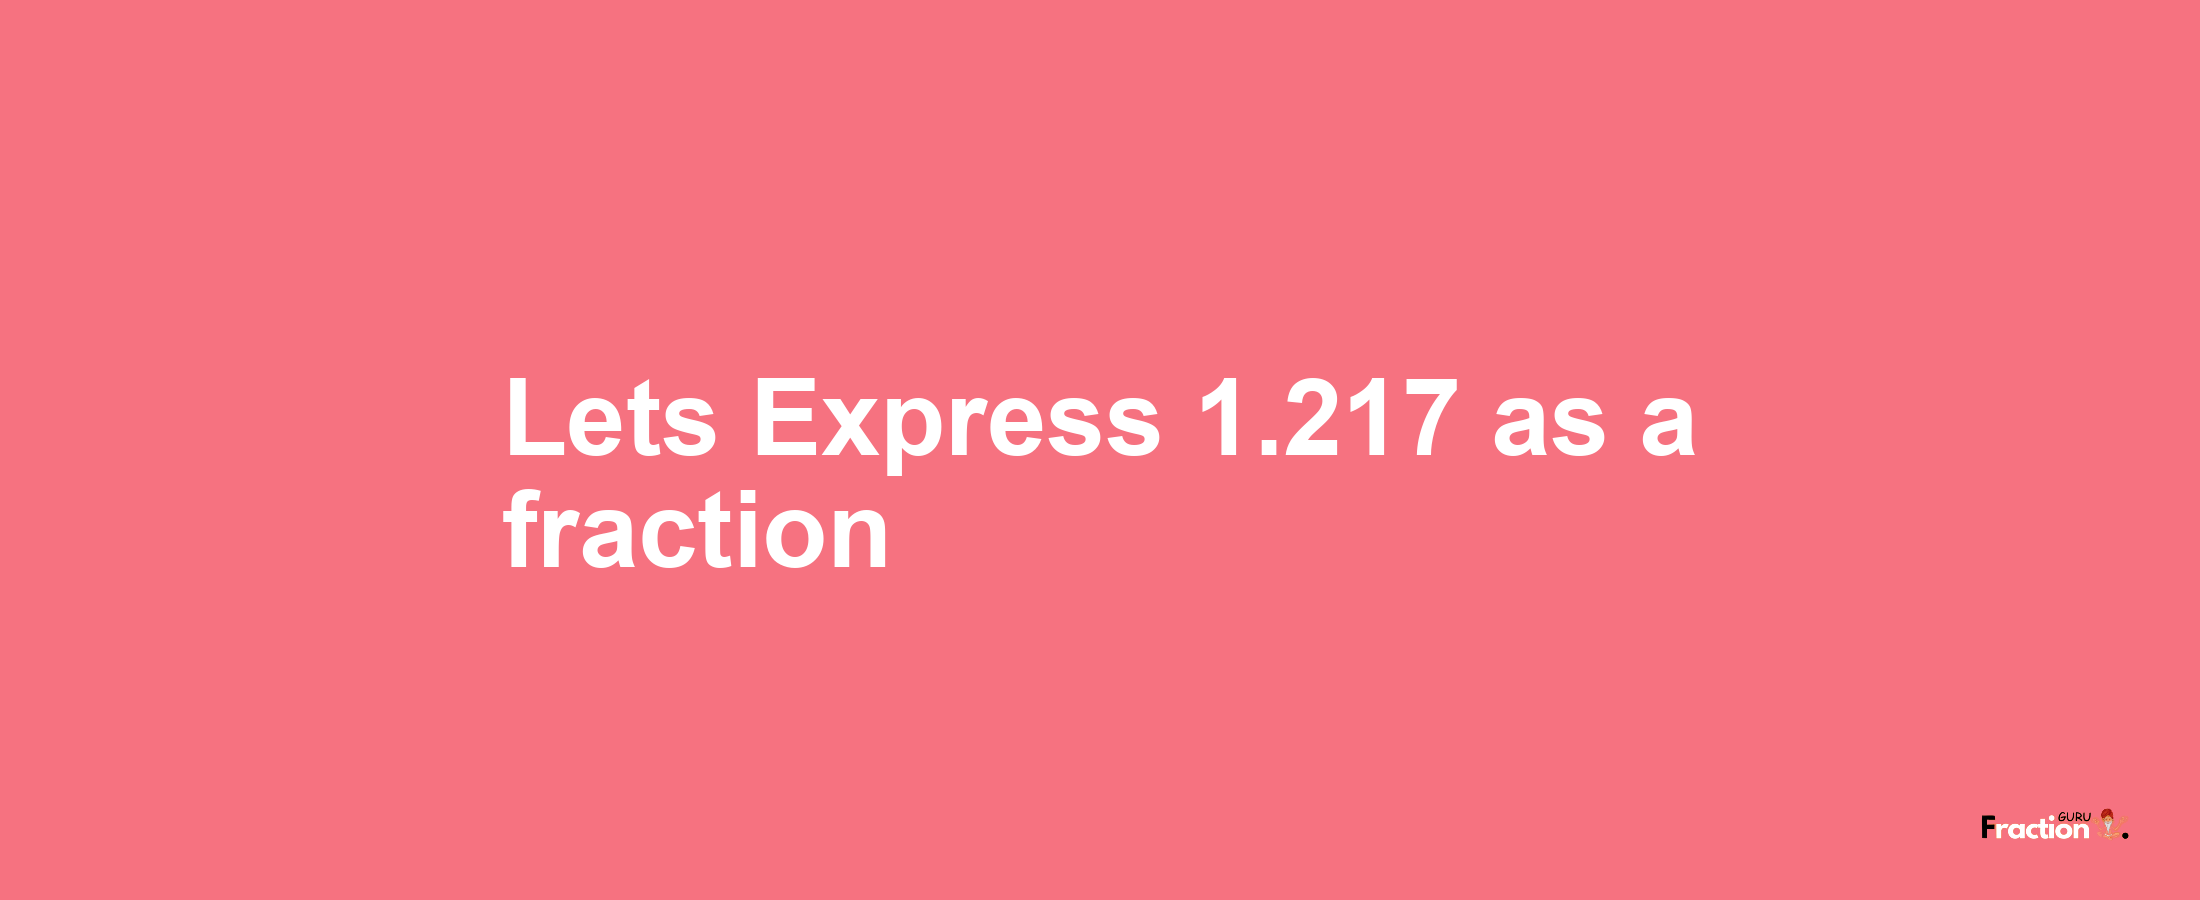 Lets Express 1.217 as afraction